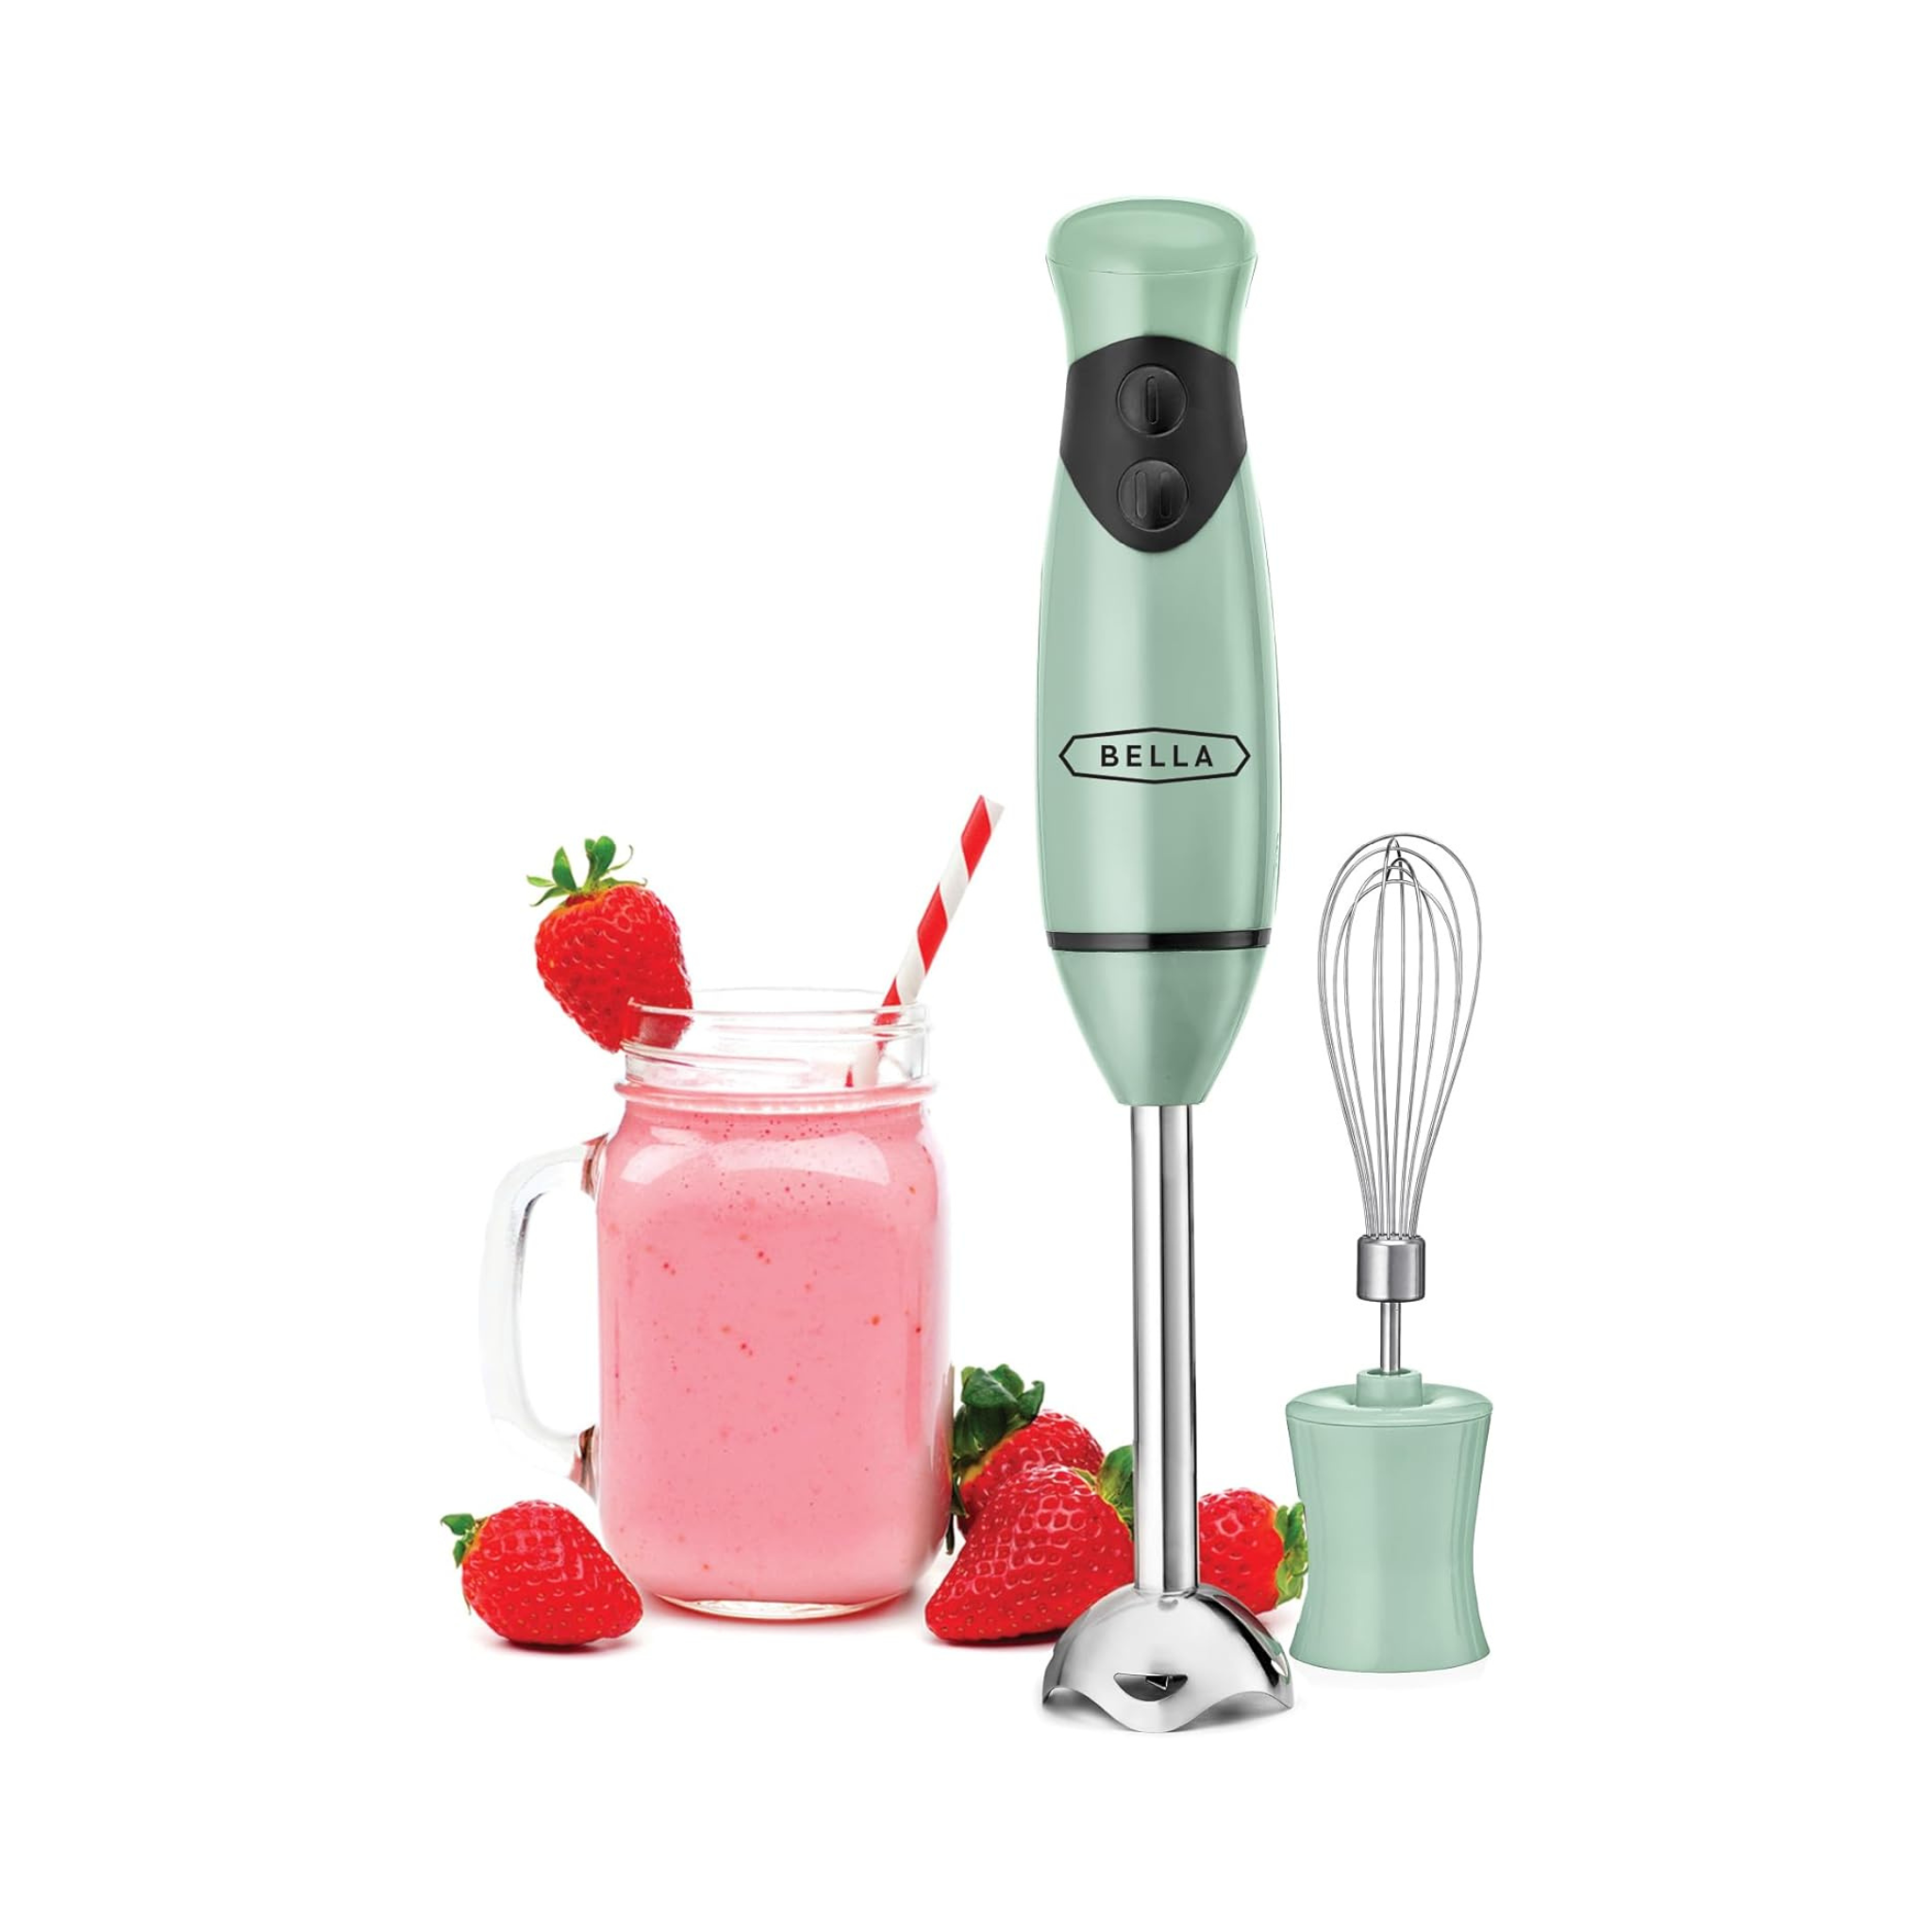 BELLA Immersion Blender, Portable Mixer and Emulsifier With Whisk Attachment